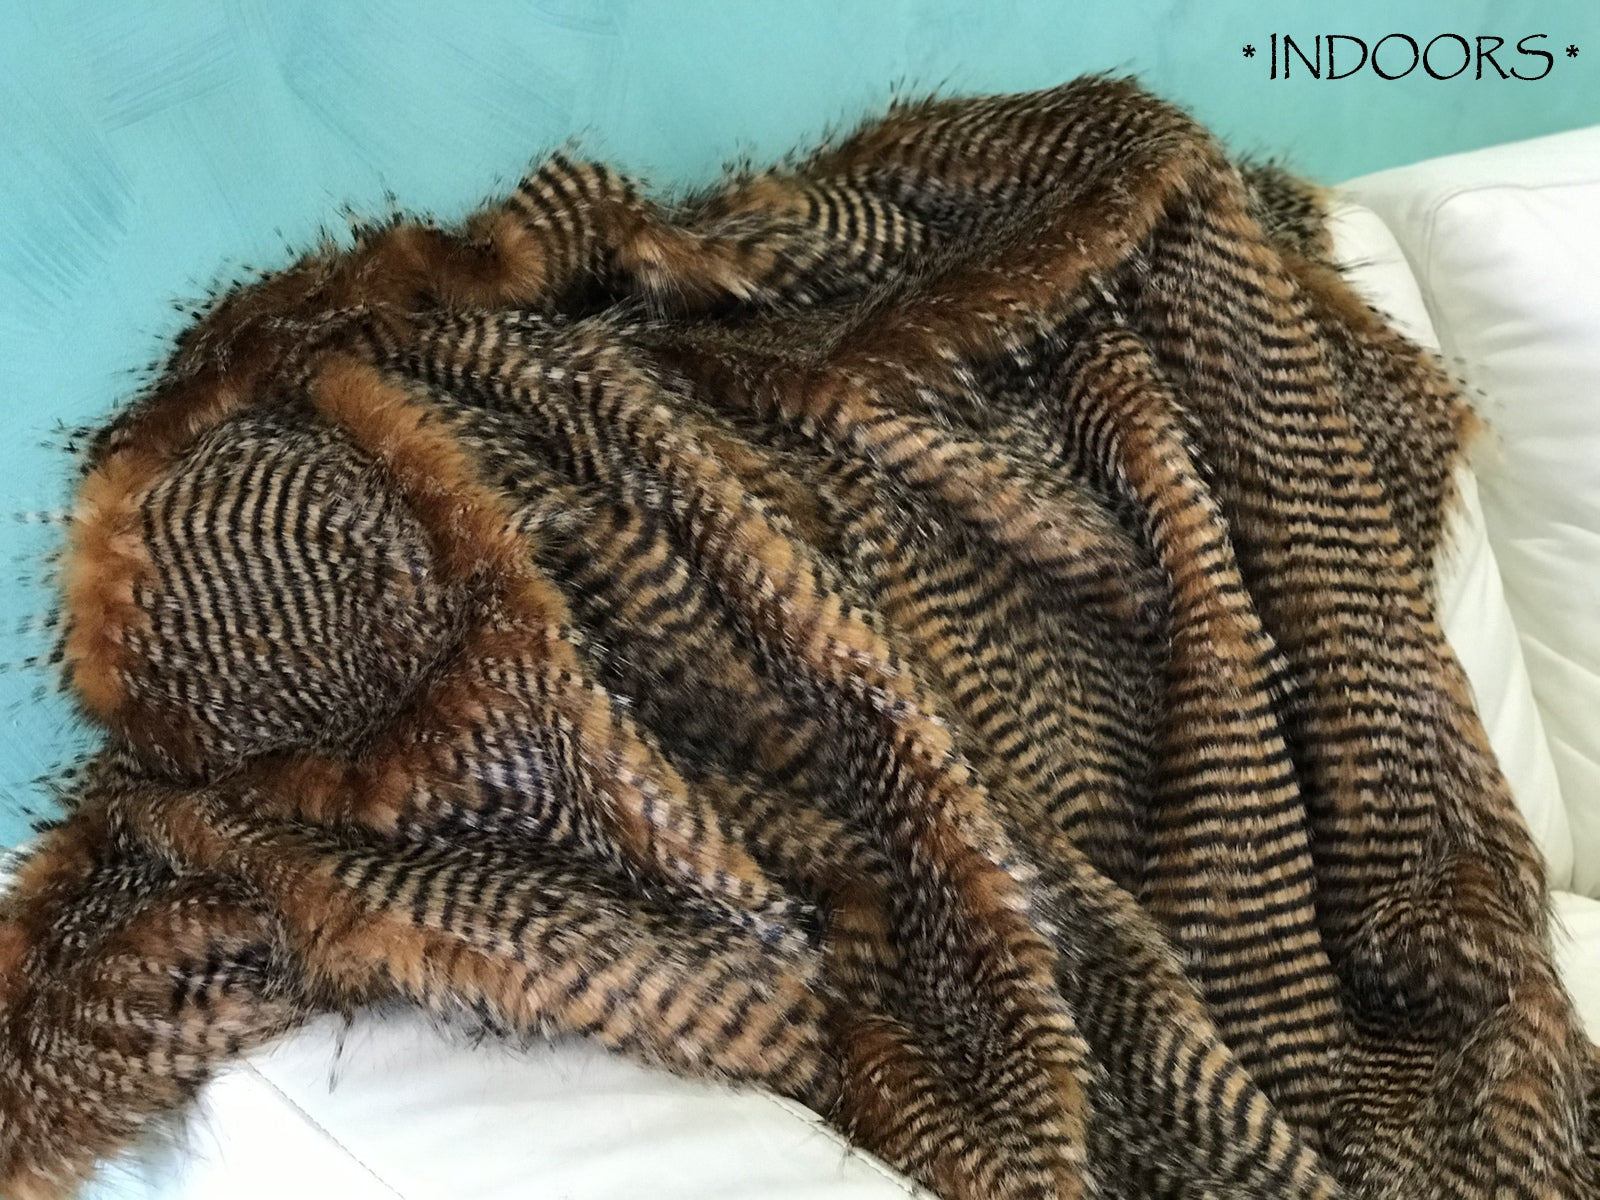 Pheasant Feather - Long Striped Feather Effect Faux Fur